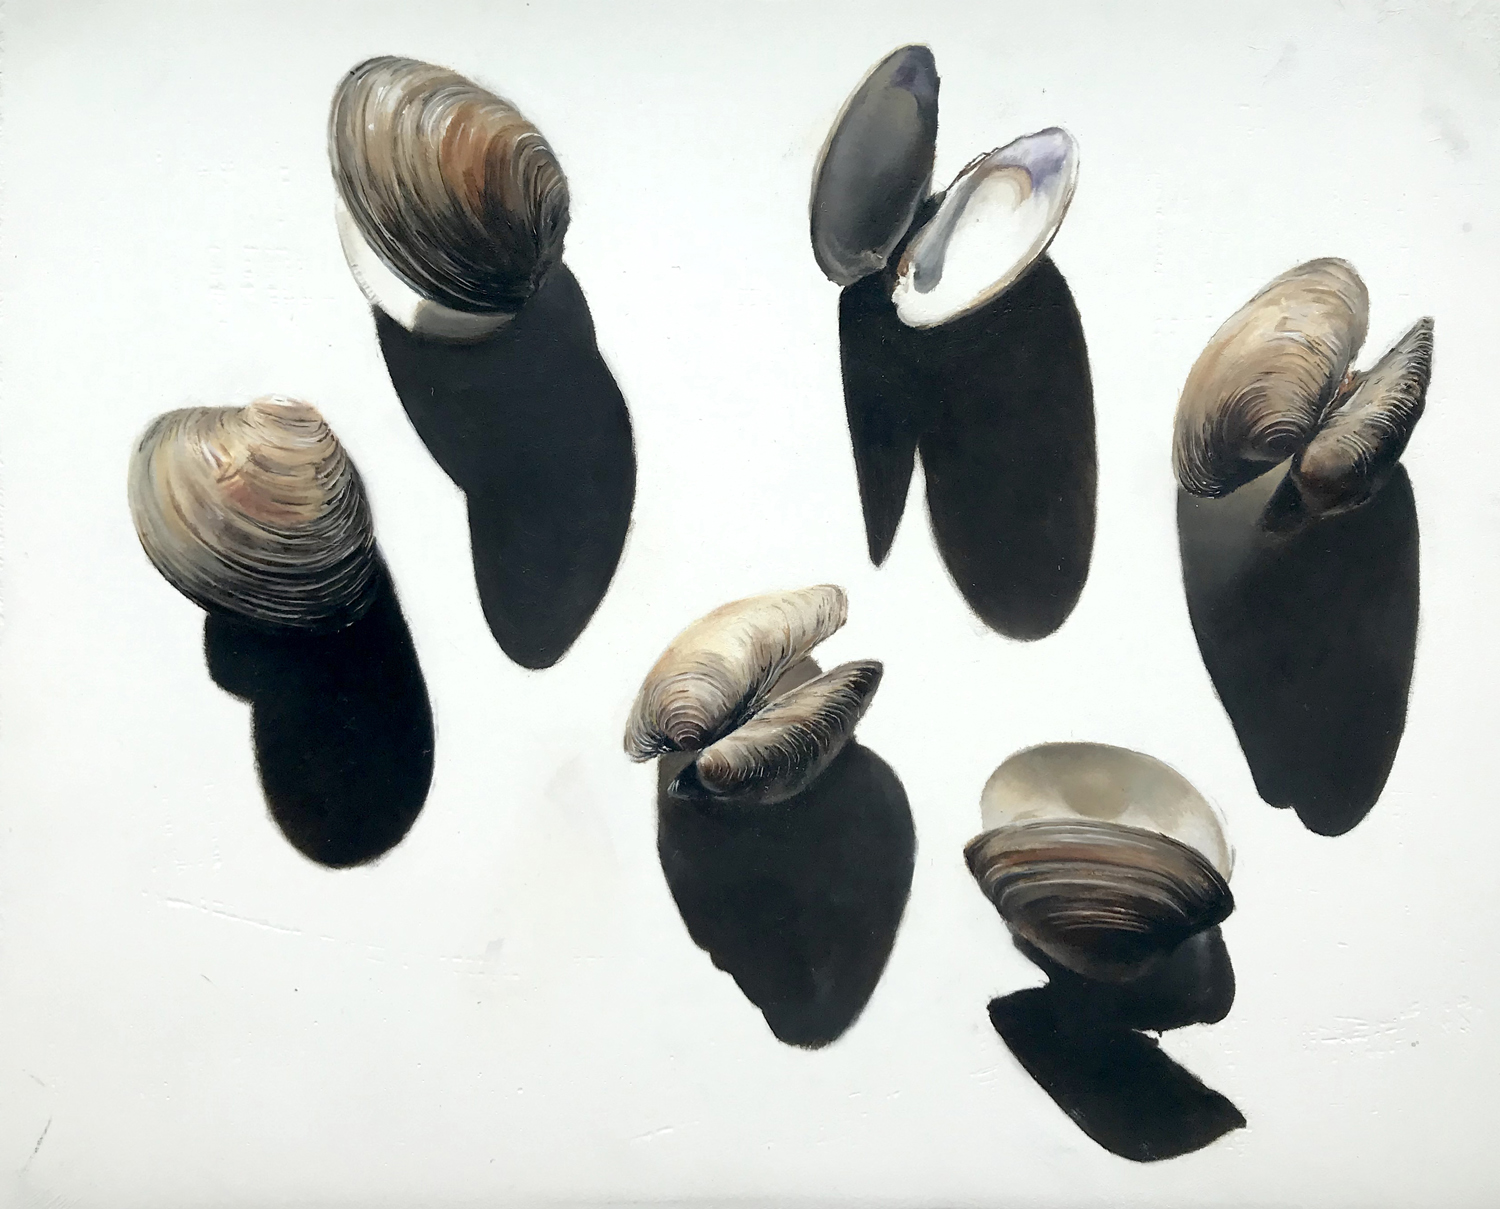 Clam Shells and Their Shadows